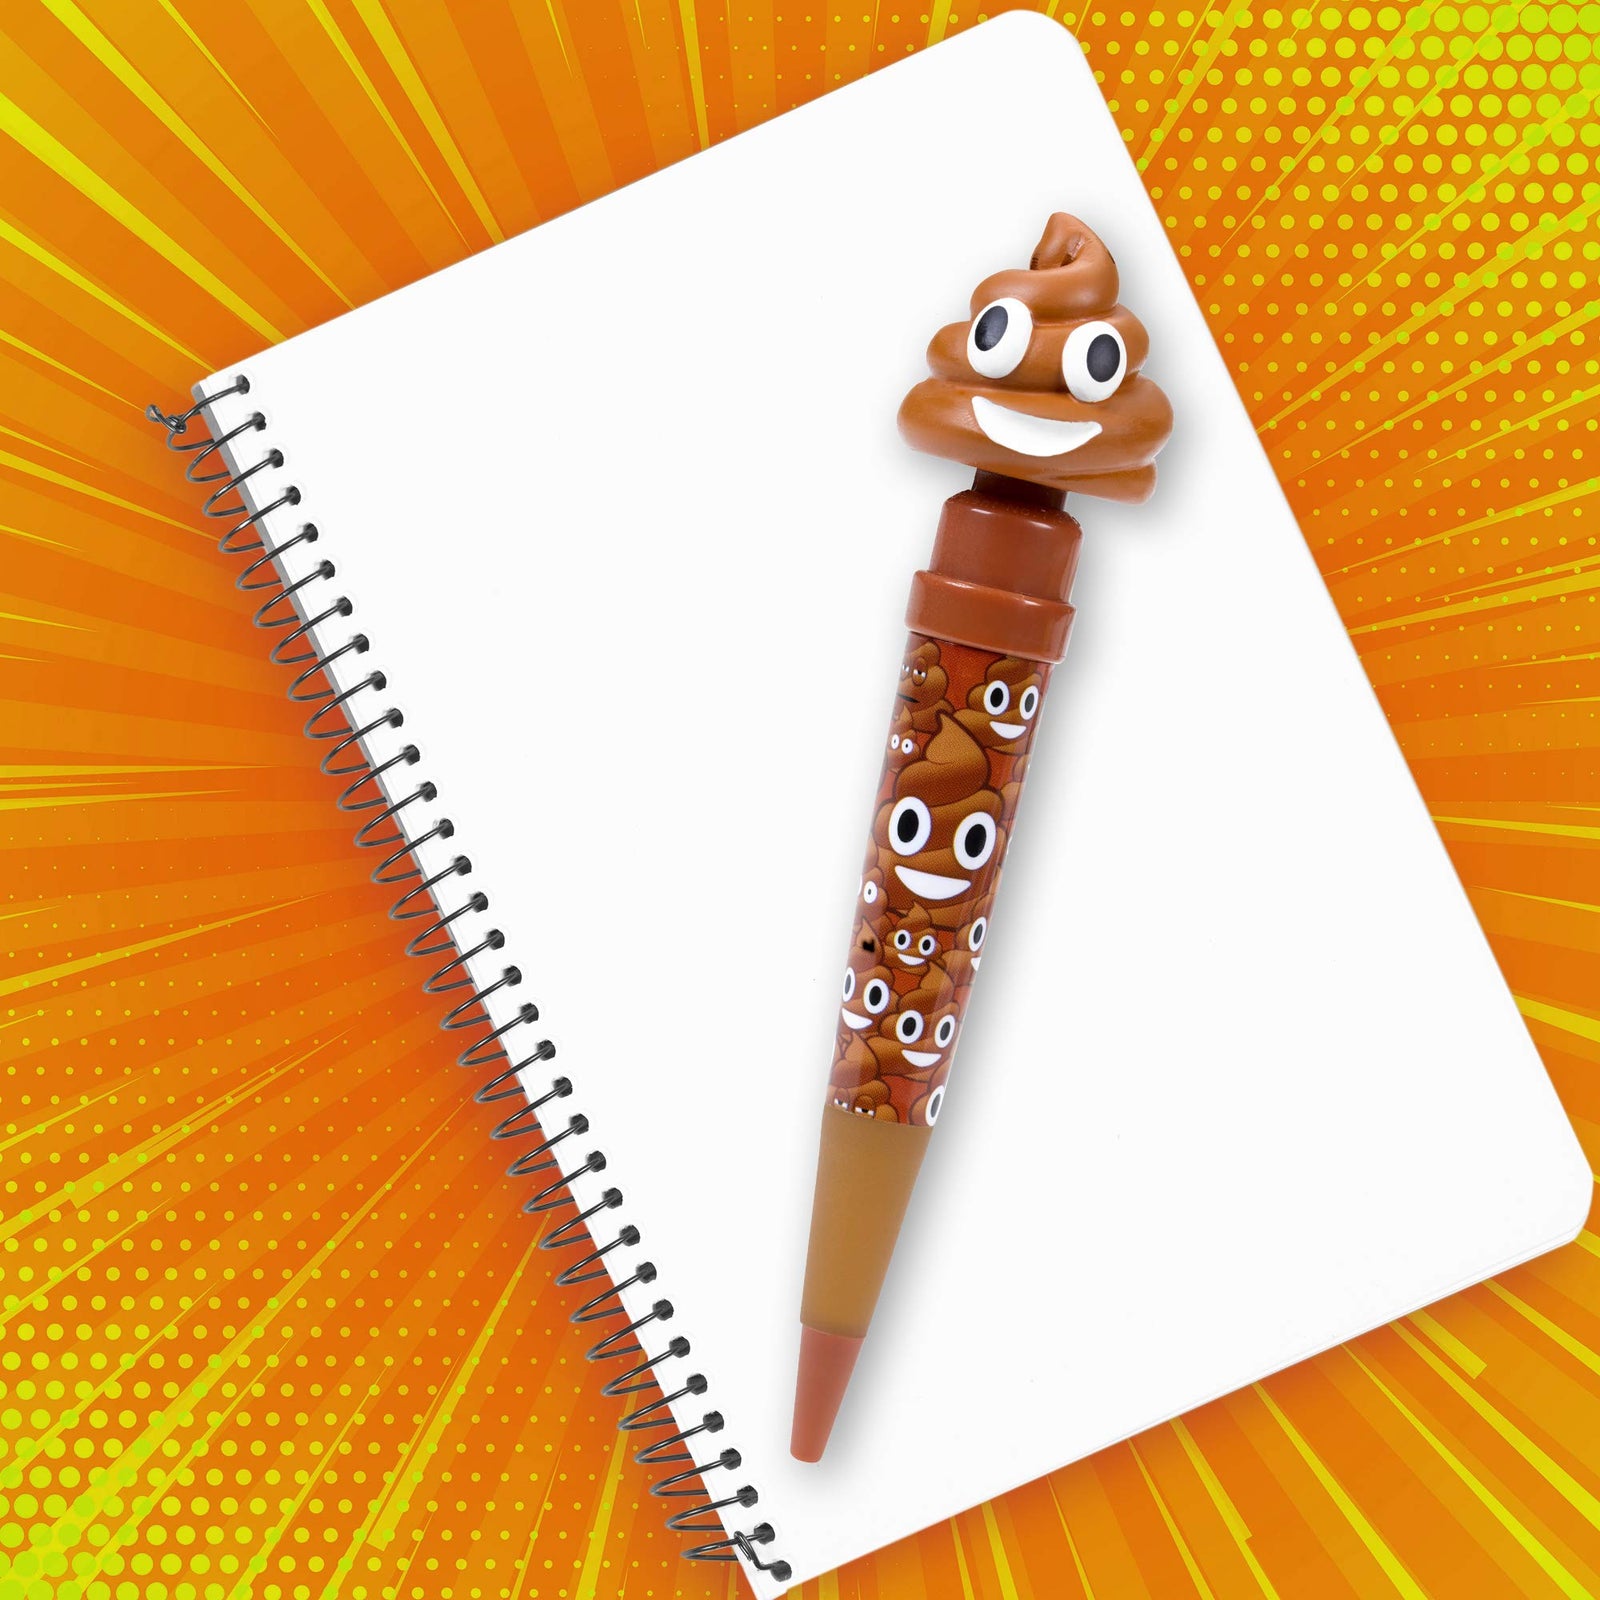 Farting Poop Emoji Pen - Makes 7 Funny Fart Sounds - Cute Smiling Poop Face Emoticon Ballpoint Pens - Talking Joke Toy for Teen Boys & Girls - Fun Silly Cool Easter Surprise Gifts for Kids & Adults